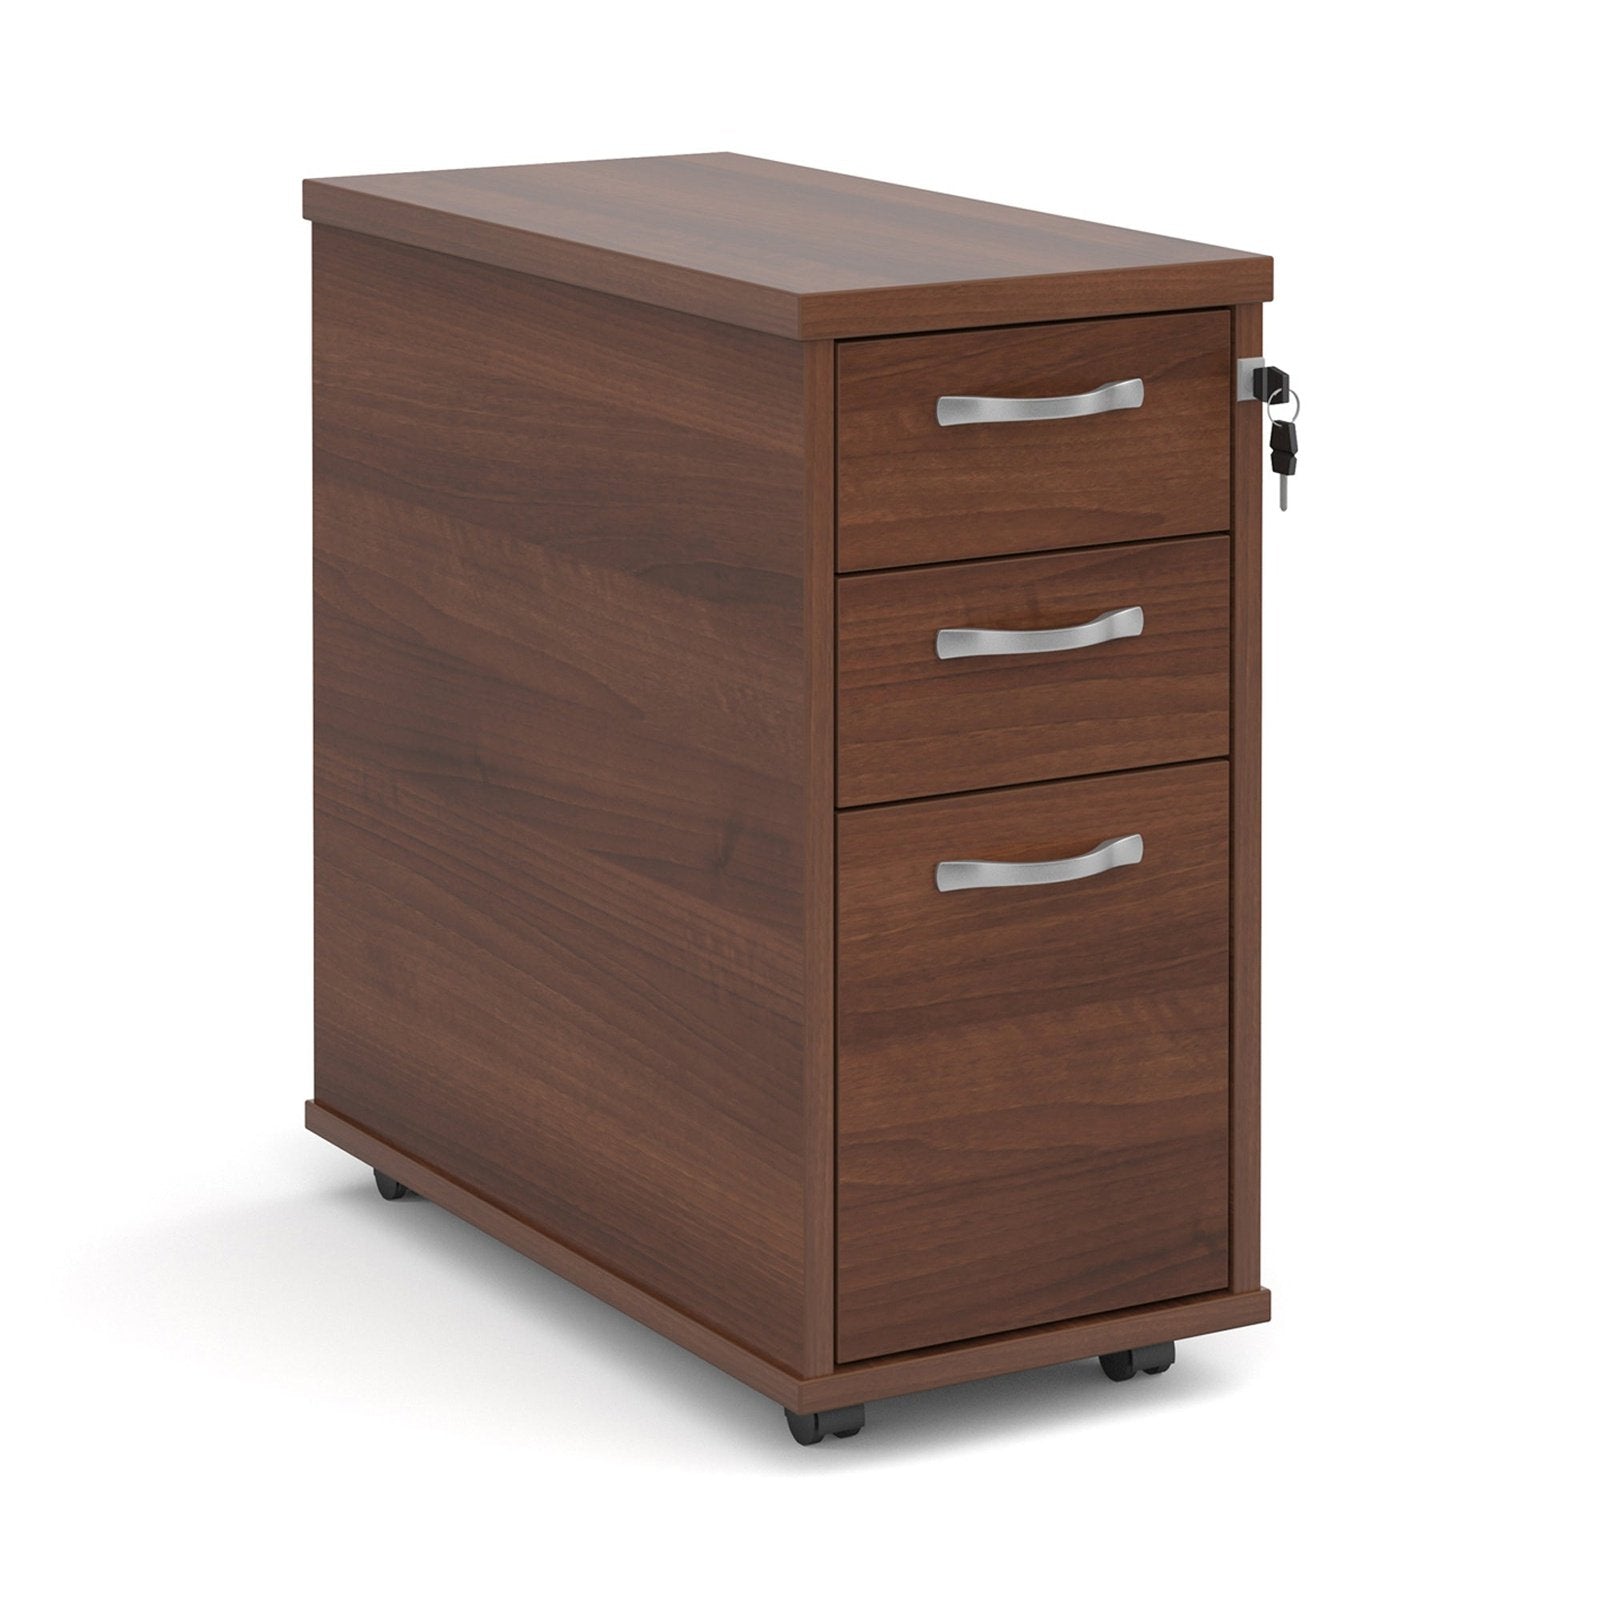 Tall slimline mobile 3 drawer pedestal with silver handles 600mm deep - Office Products Online